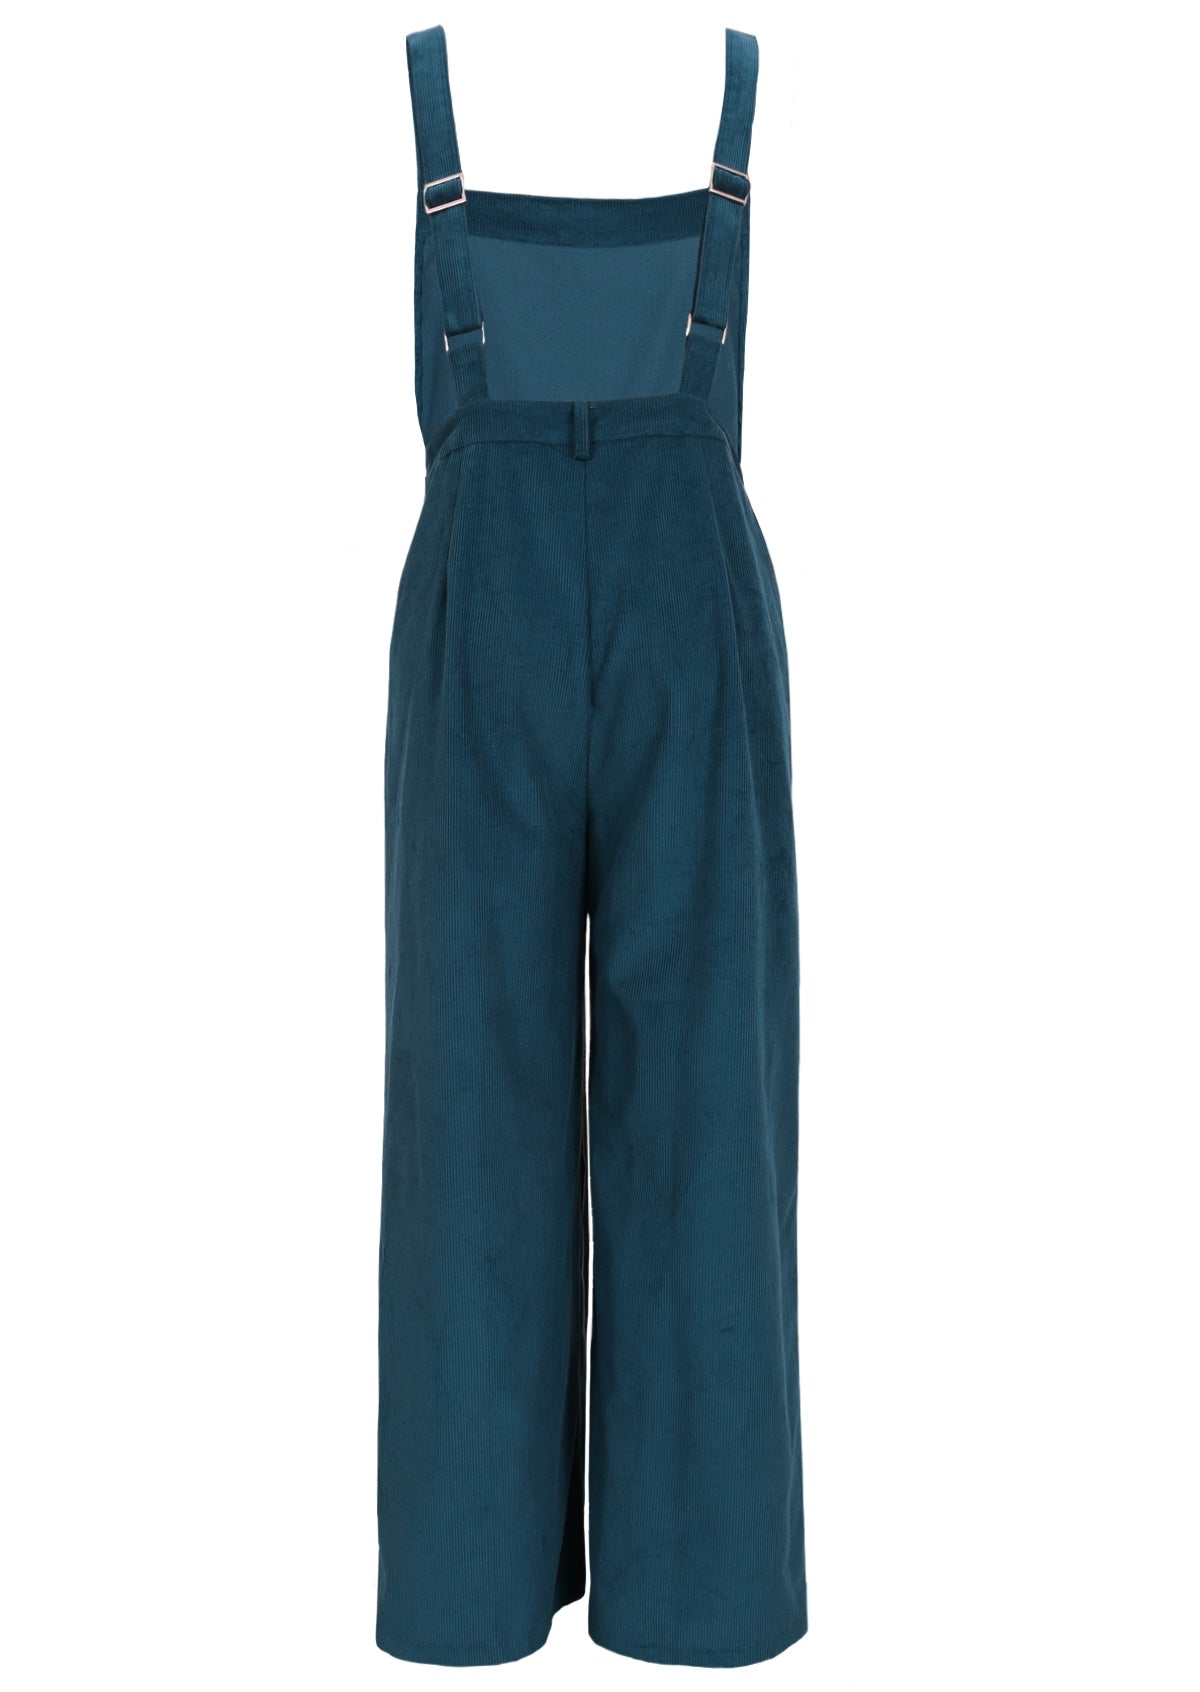 Cotton corduroy overalls have belt loops and pockets. 